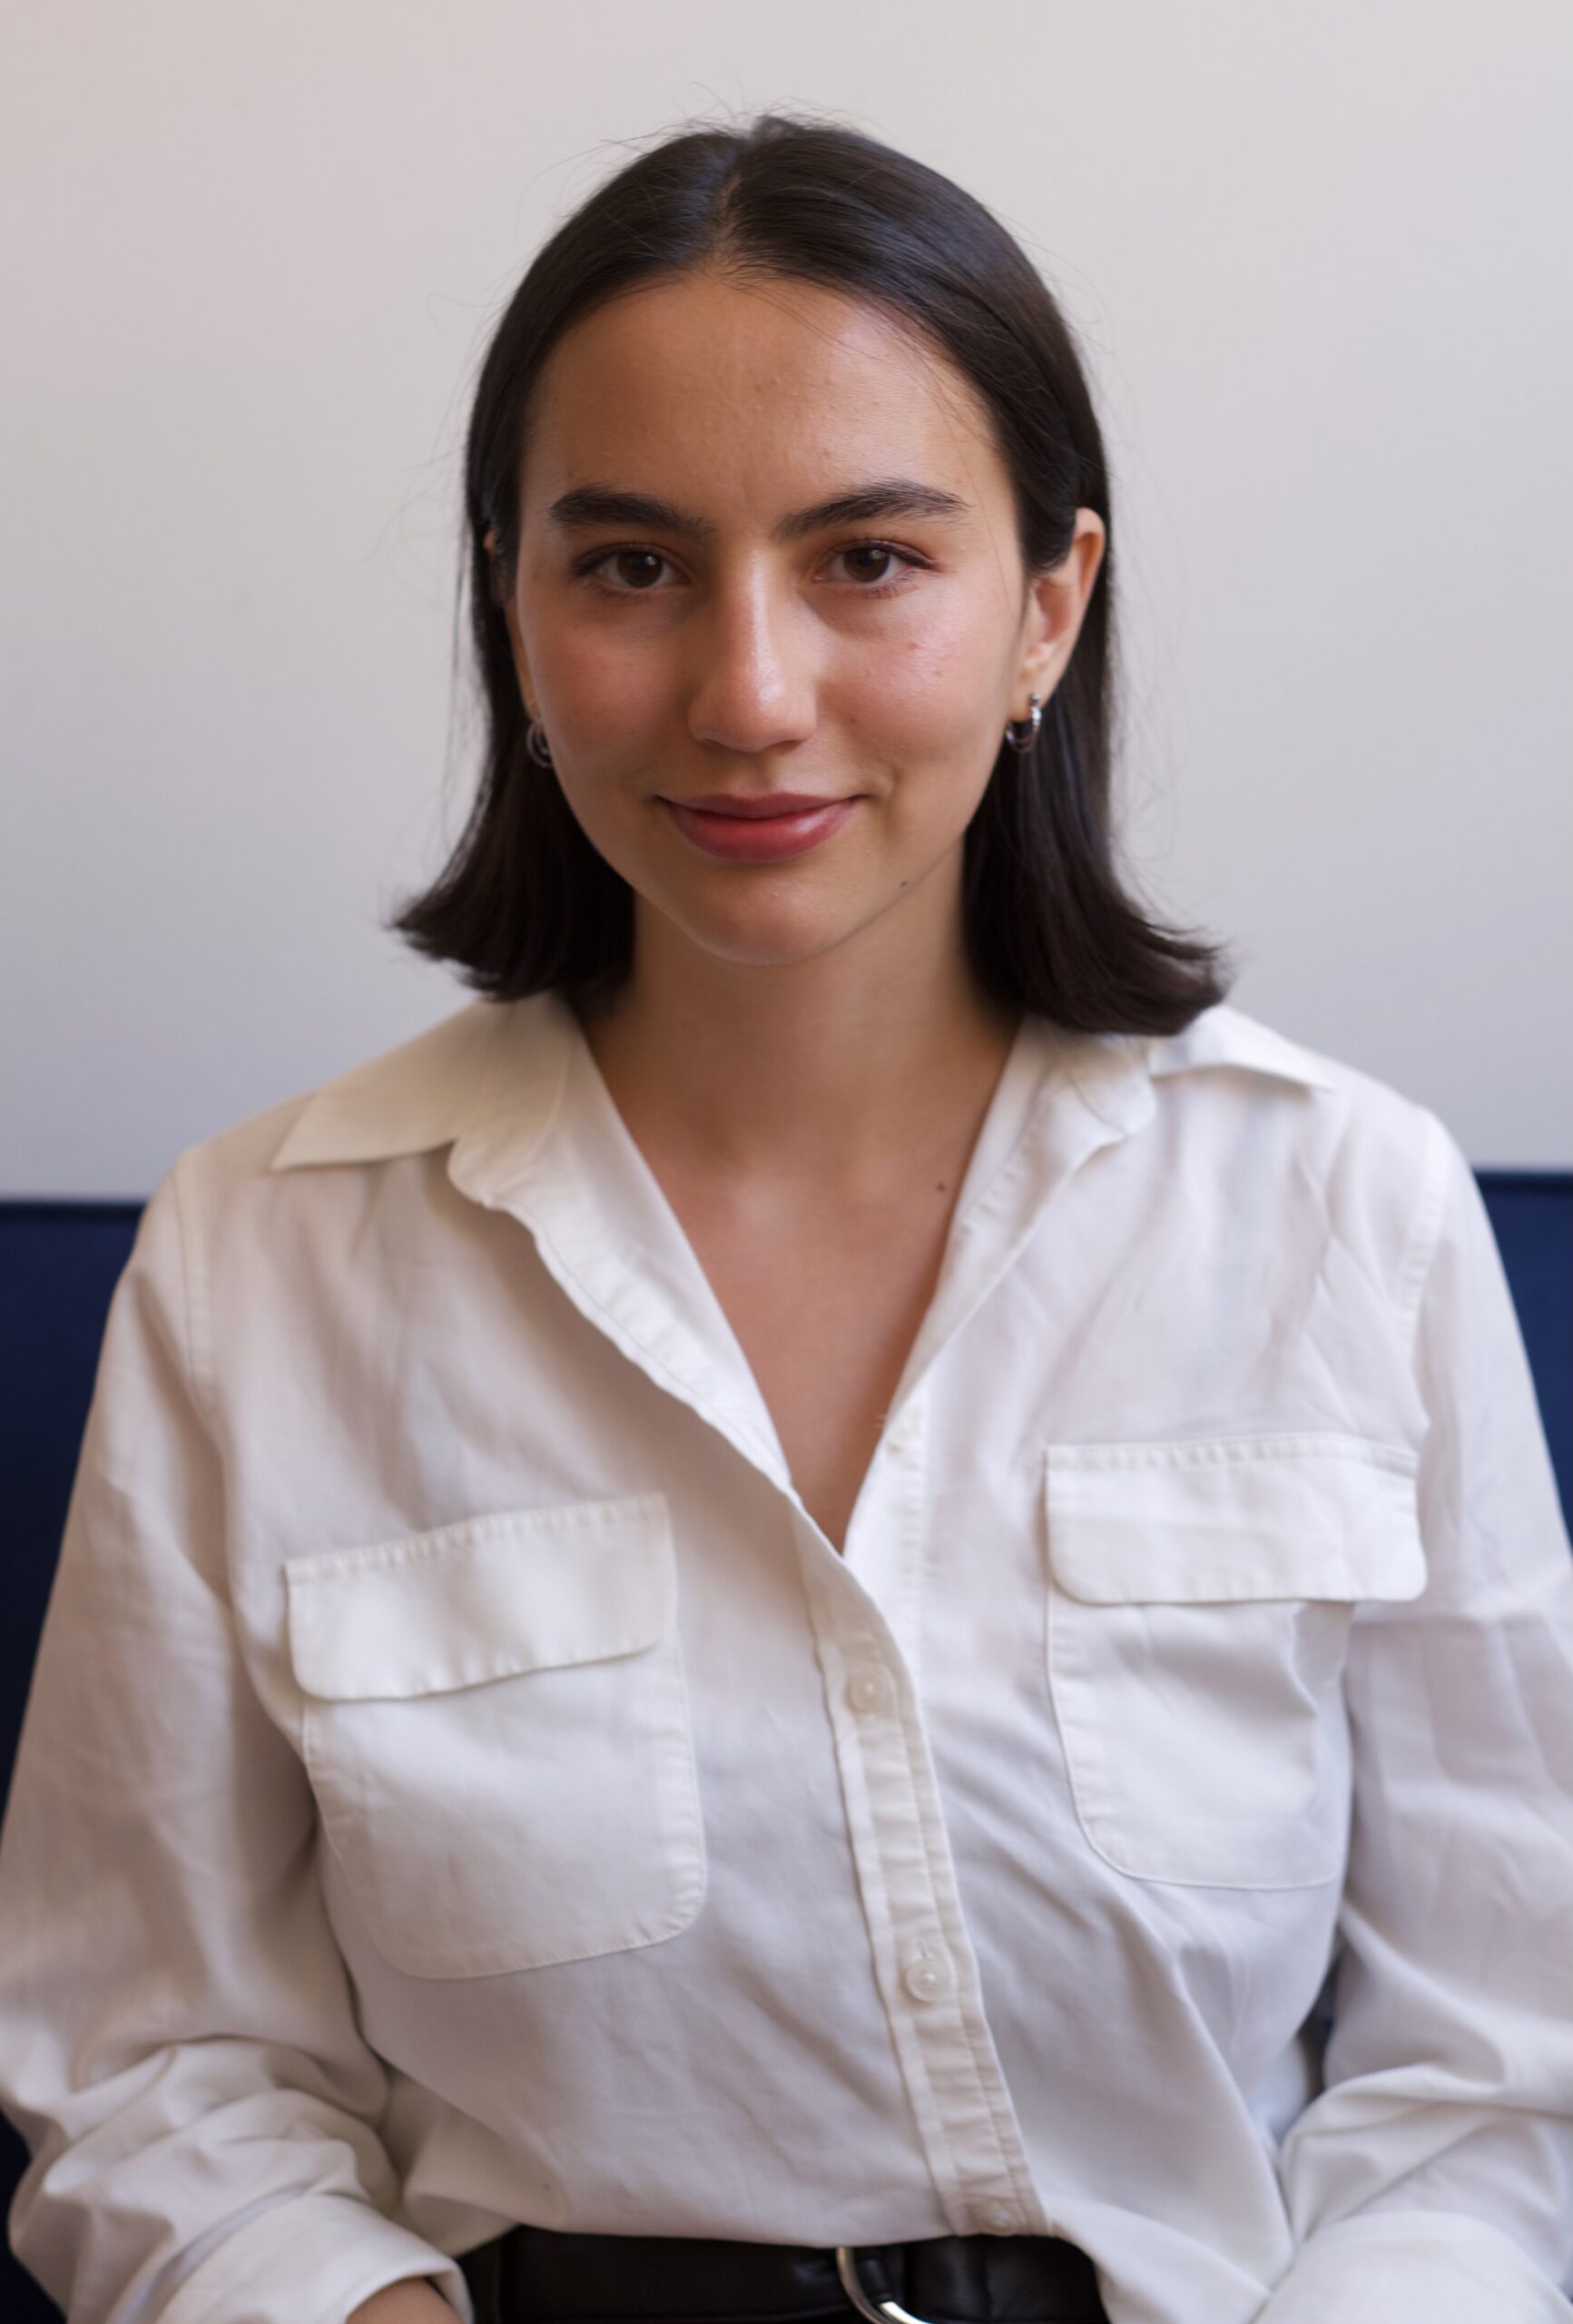 Samahria Alpern's headshot. Samahria is smiling slightly against a white wall. She has shoulder-length dark brown hair and is wearing a white button-up shirt. 